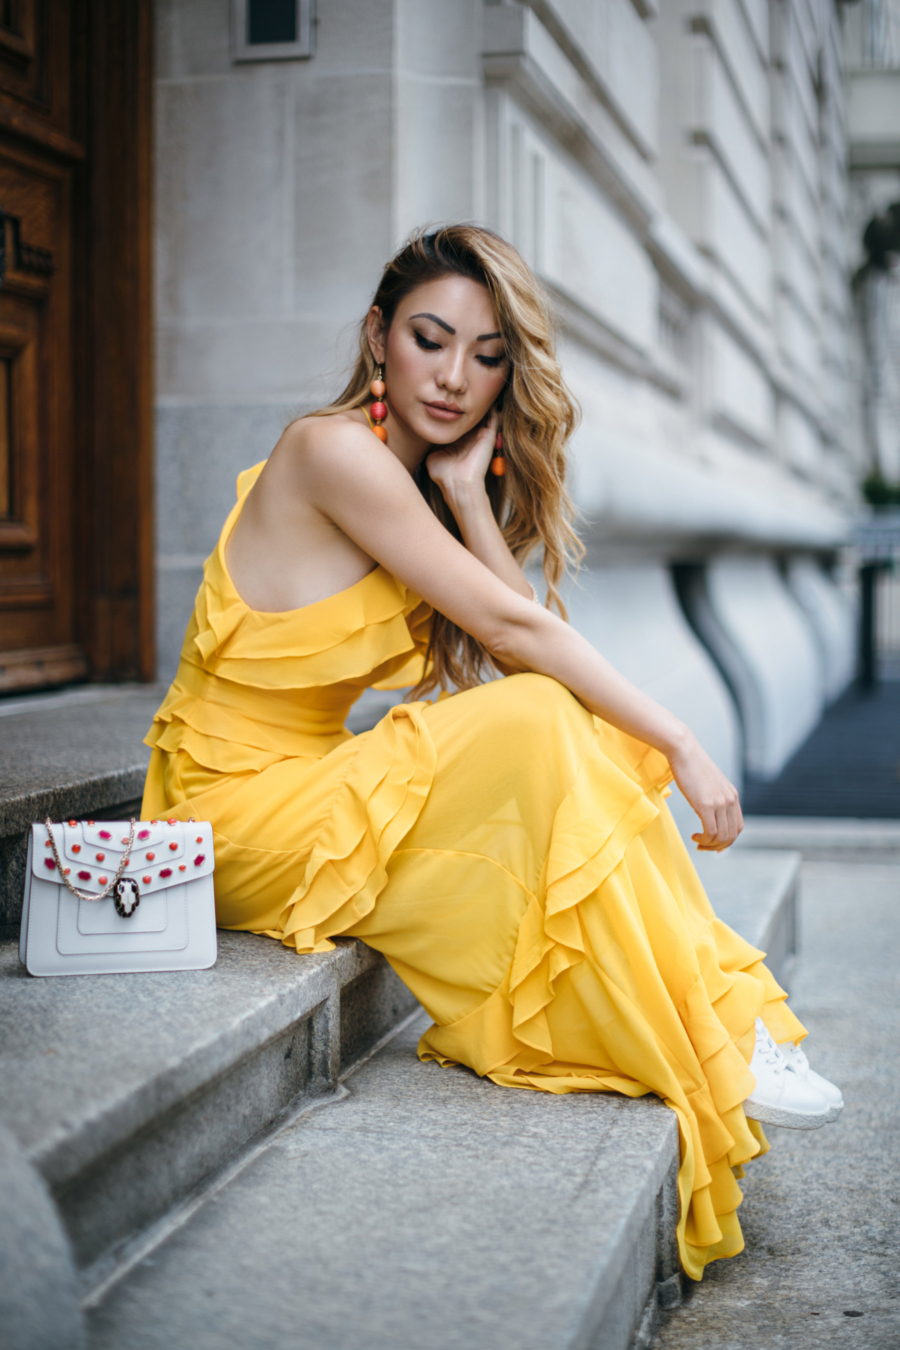 Tier Dress and Sneakers = 8 Pieces To Achieve The Modern Romantic Look // NotJessFashion.com